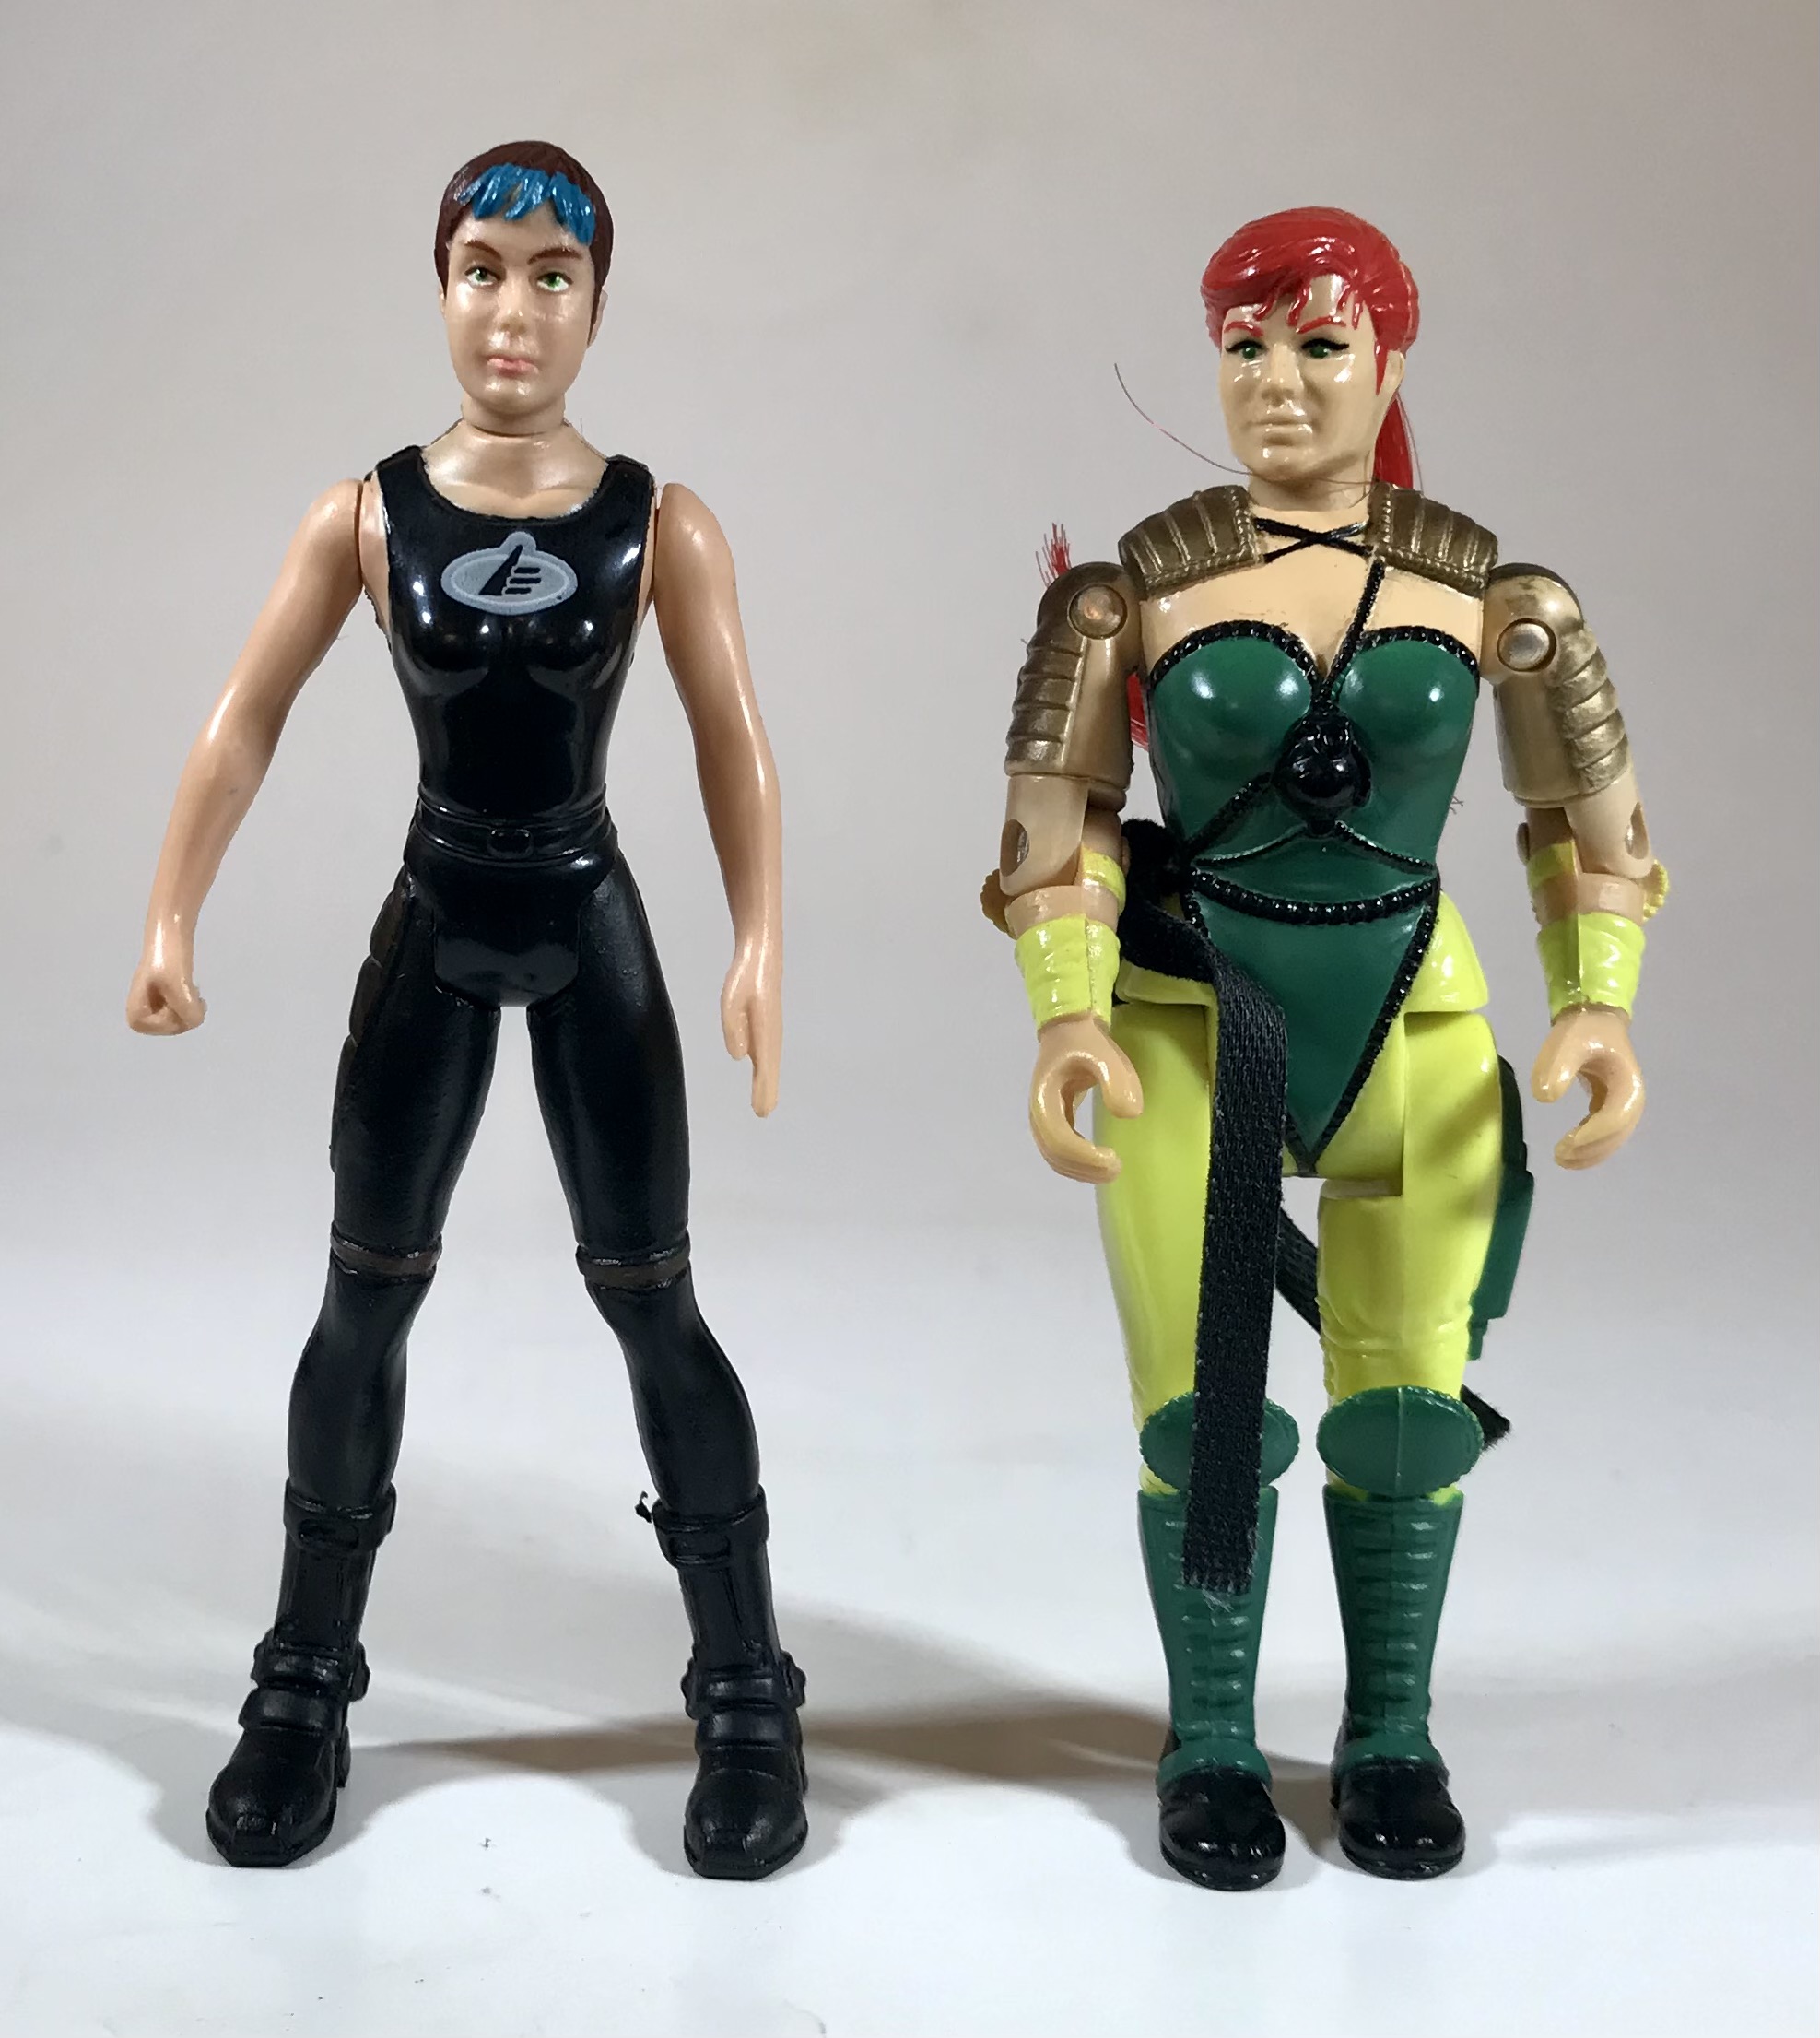 2001 Jack in the Box Kids Meal Max Steel Toy Review – The Dragon